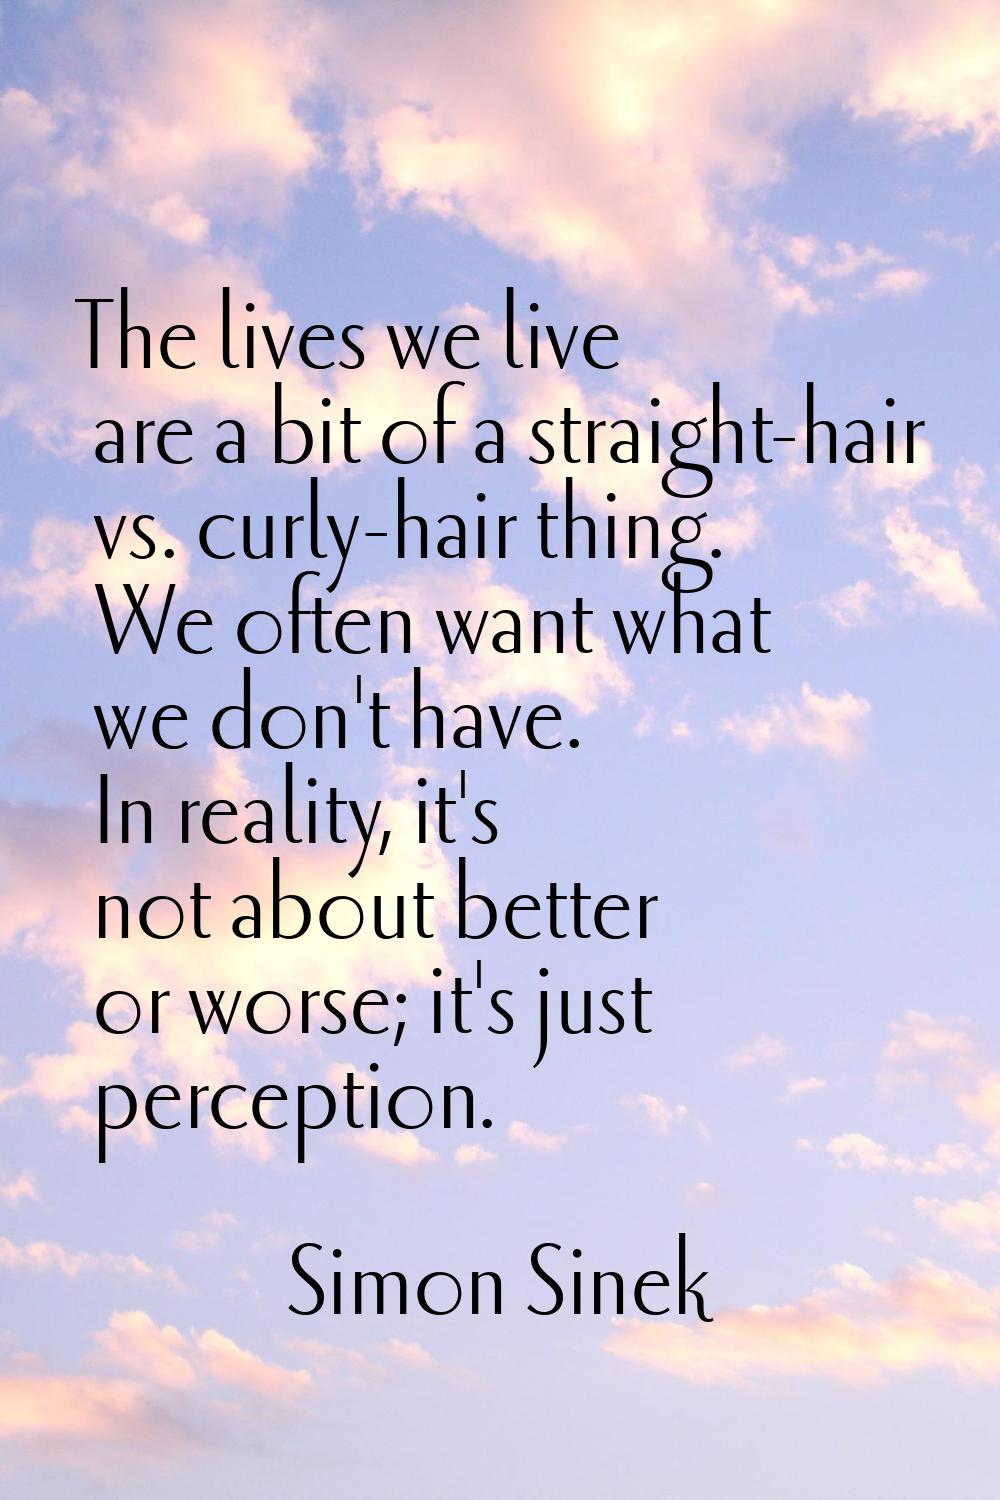 The lives we live are a bit of a straight-hair vs. curly-hair thing. We often want what we don't ha